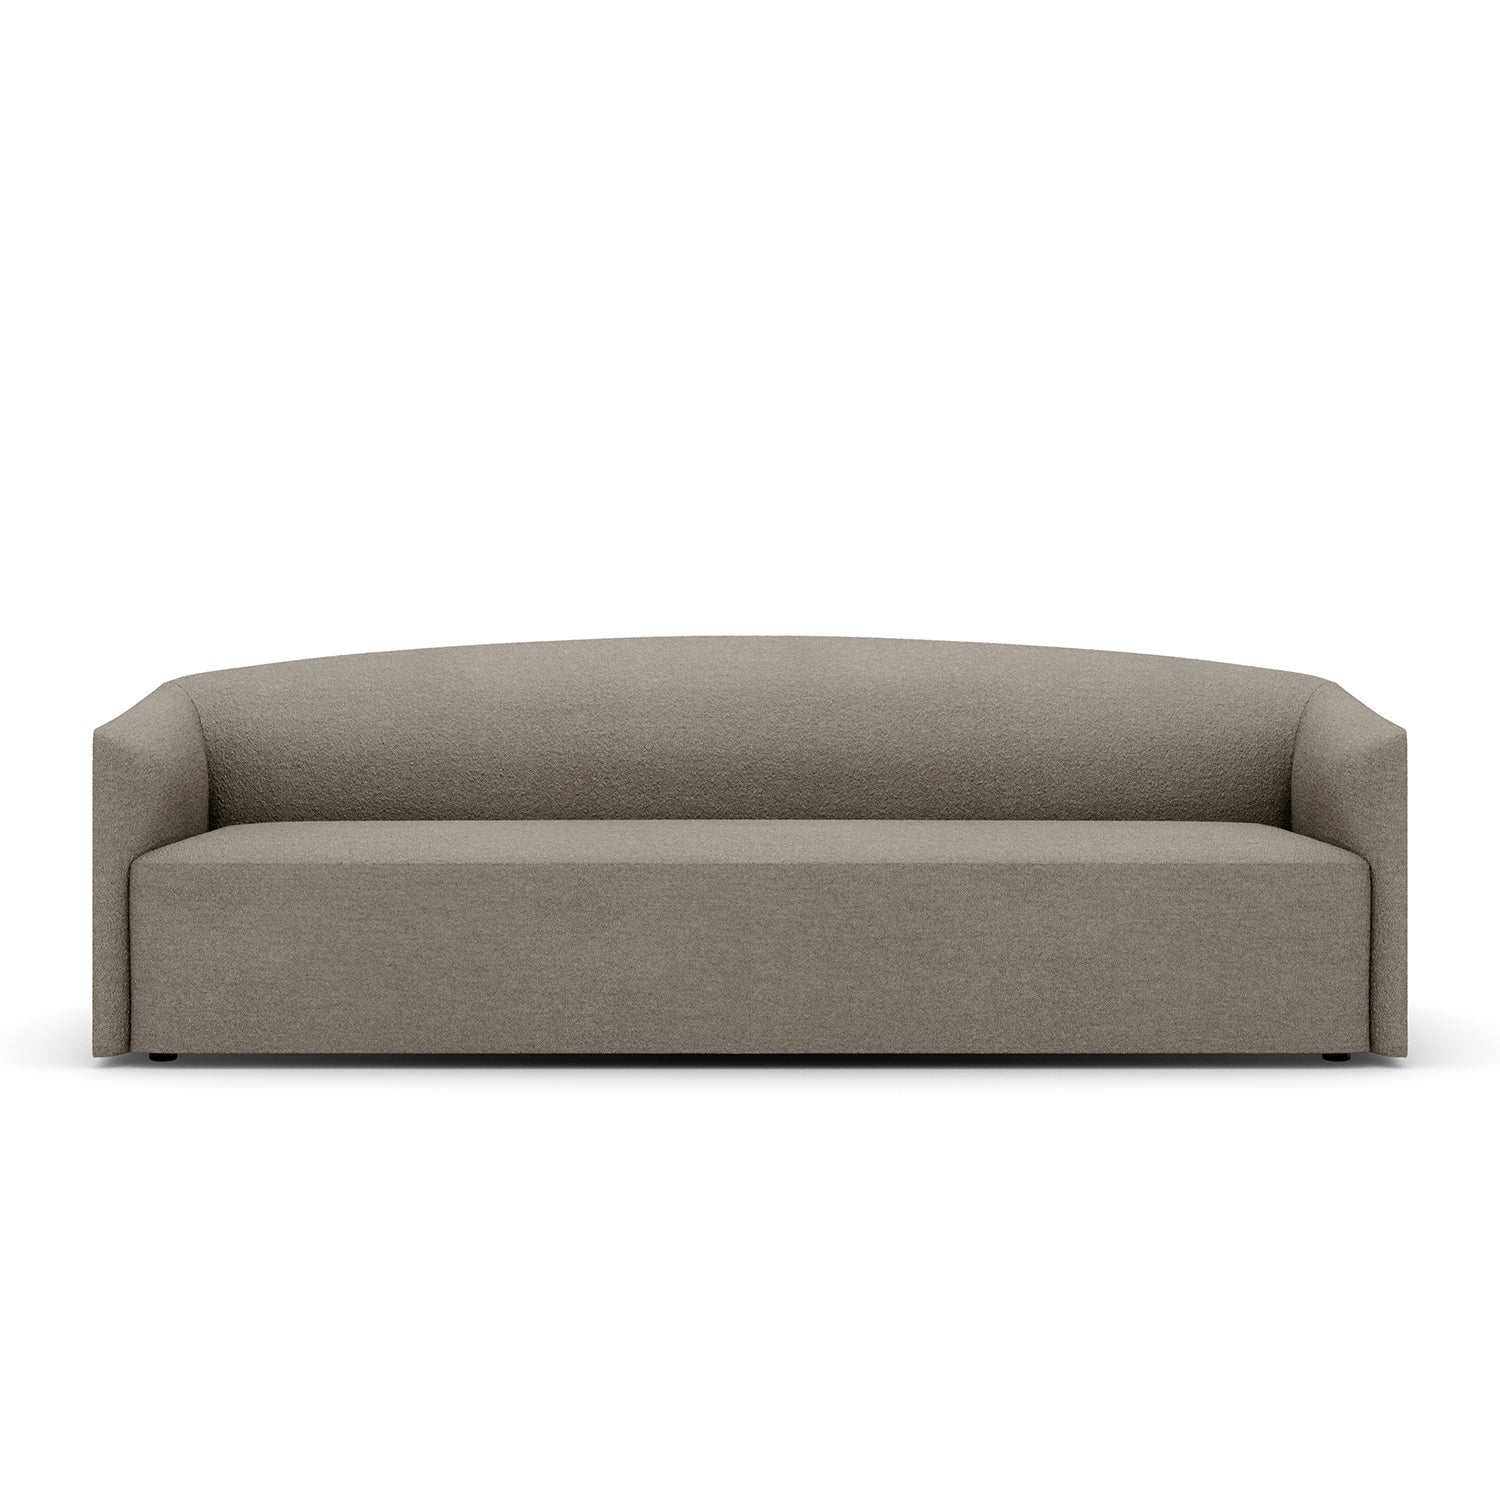 New Works Shore 3 Seater Sofa in taupe